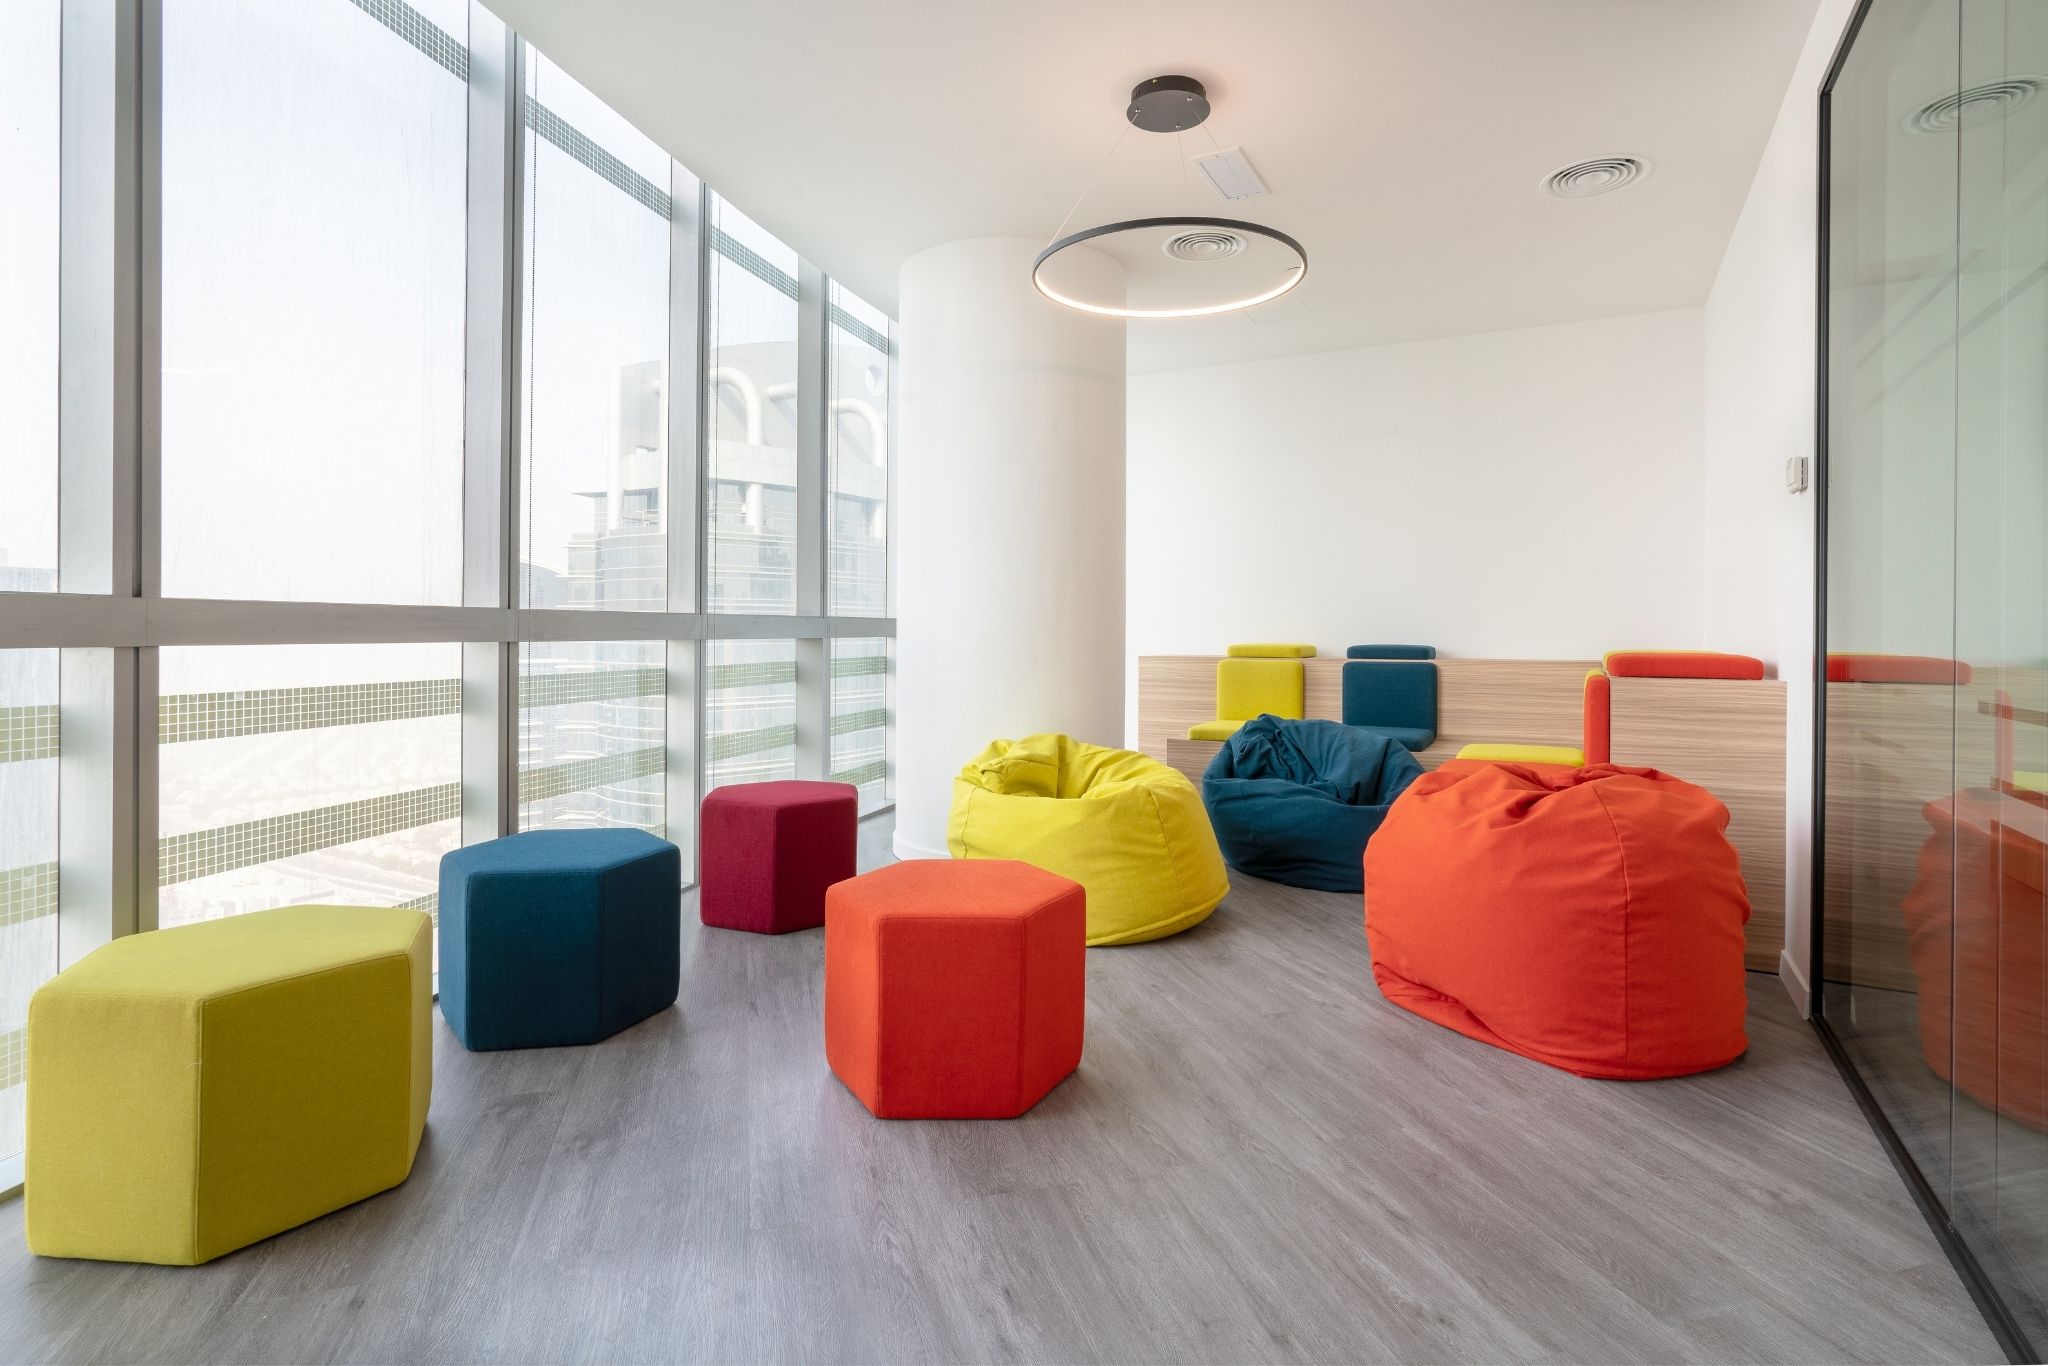 Renault regional office in Dubai design and build by Motif Interiors6